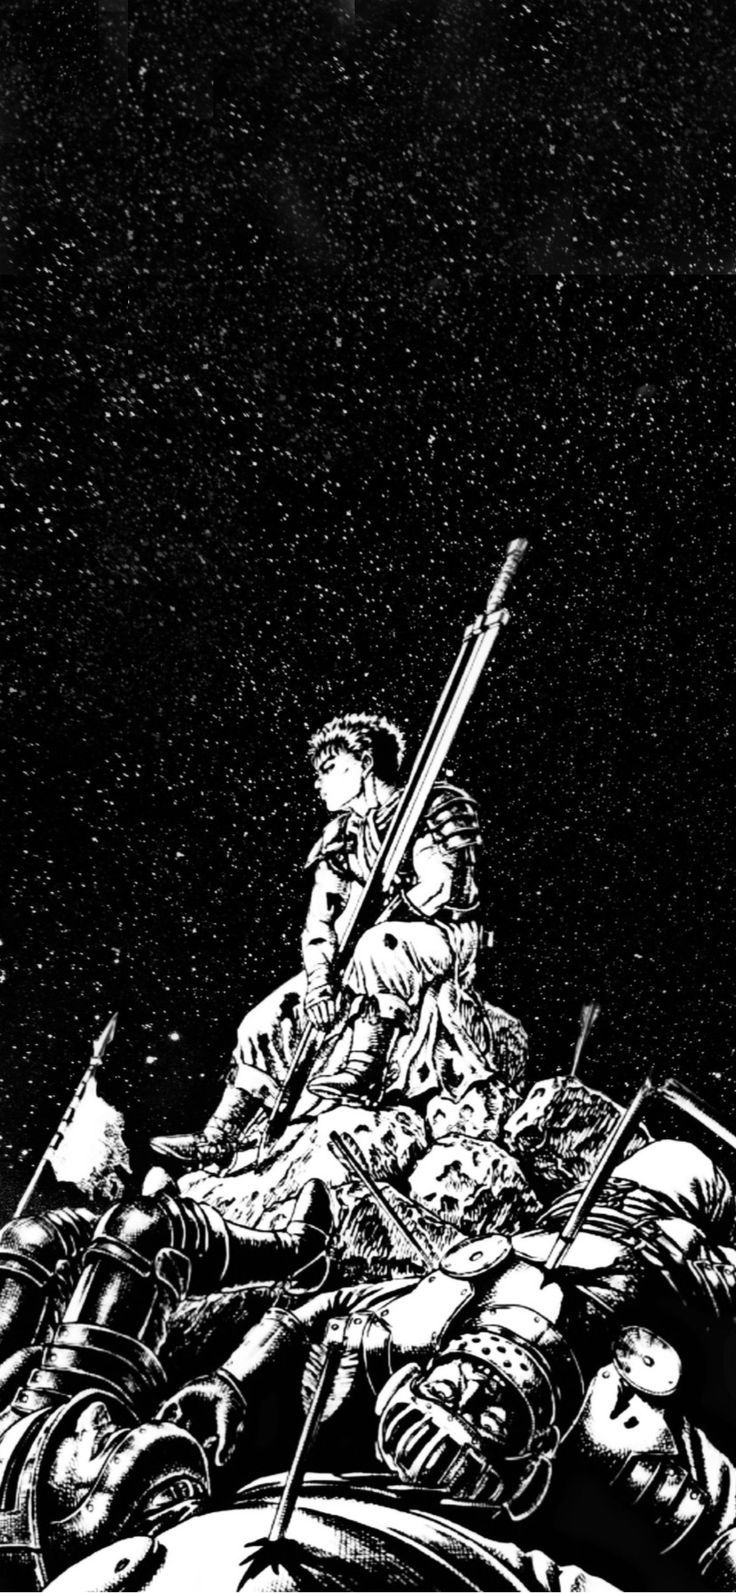 Berserk Wallpaper for mobile phone tablet desktop computer and other  devices HD and 4K wallpapers  Wallpapers for mobile phones Berserk  Wallpaper